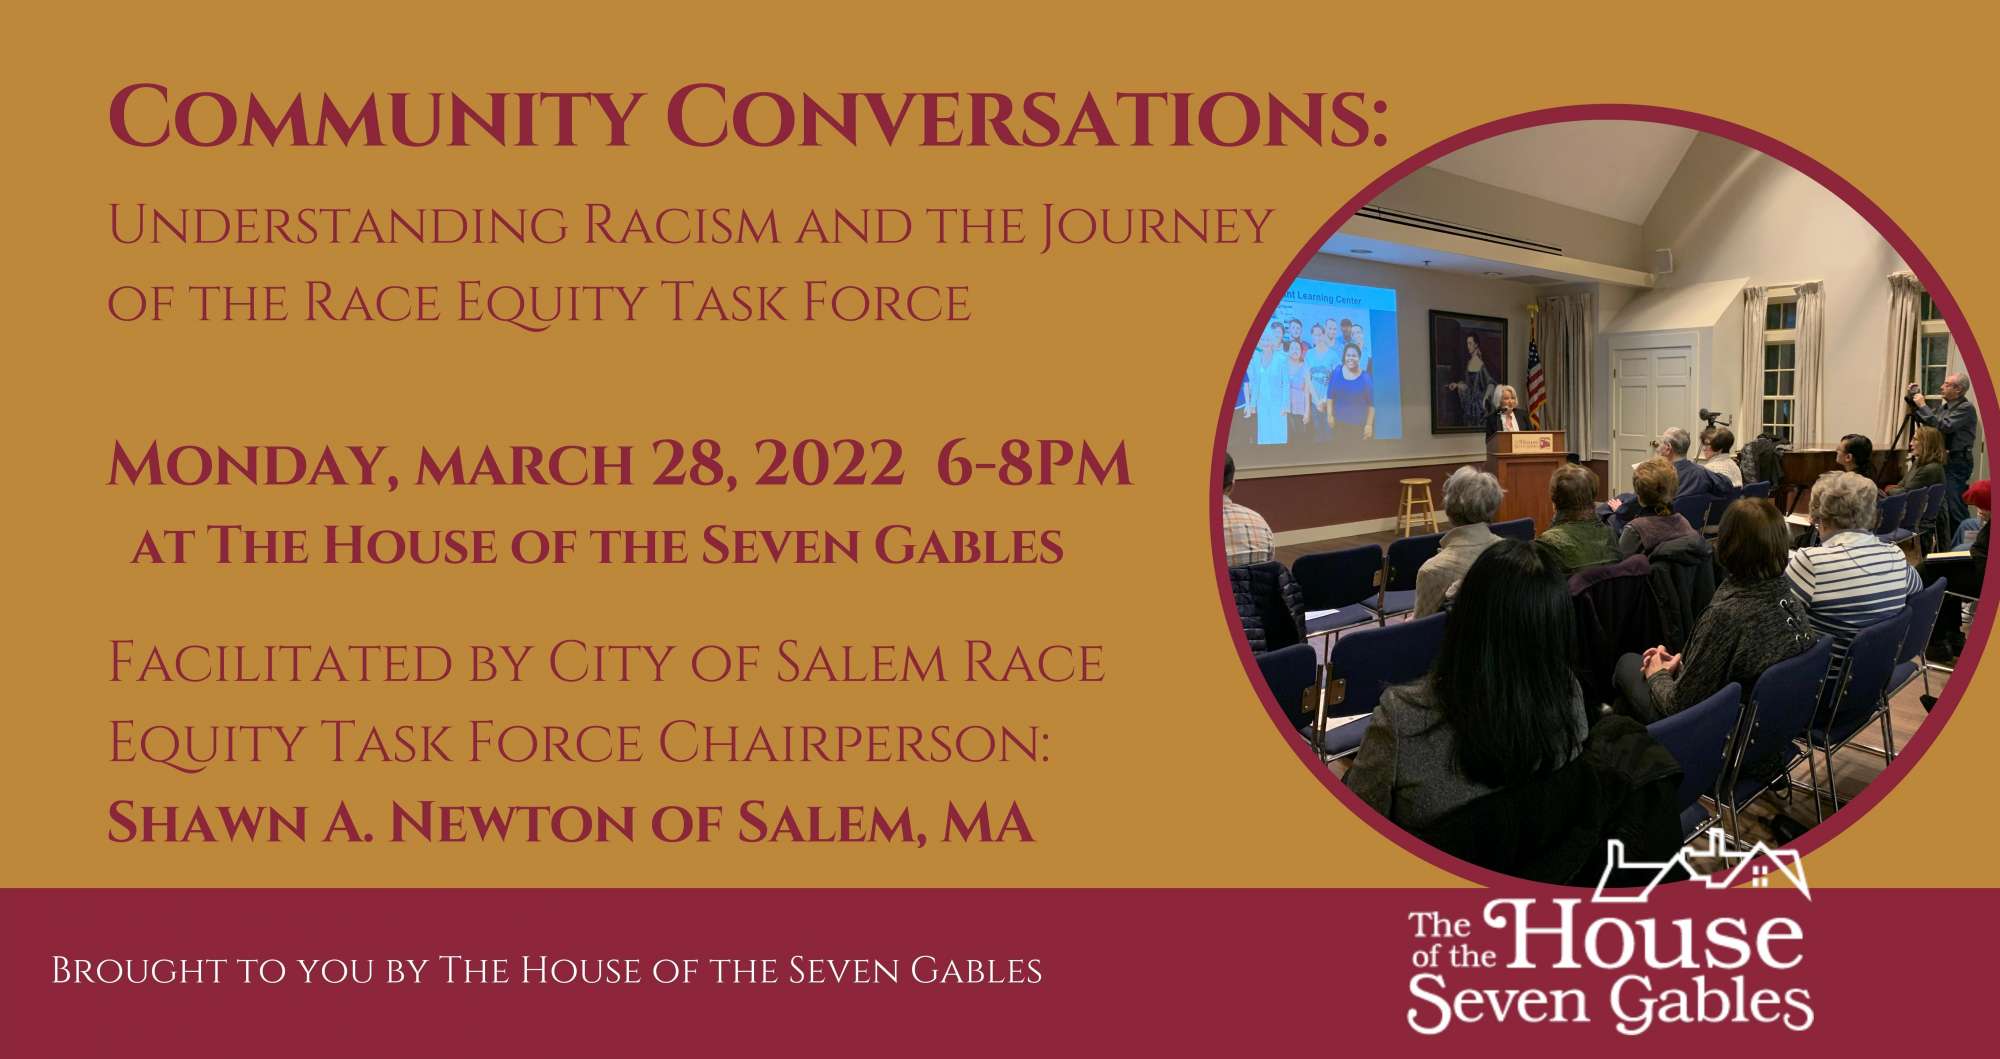 Community Conversations: Understanding Racism and the Journey of the Race Equity Task Force Monday, March 28, 2022 6-8PM at The House of the Seven Gables Facilitated by City of Salem Race and Equity Task Force Chairperson Shawn Newton of Salem, MA.